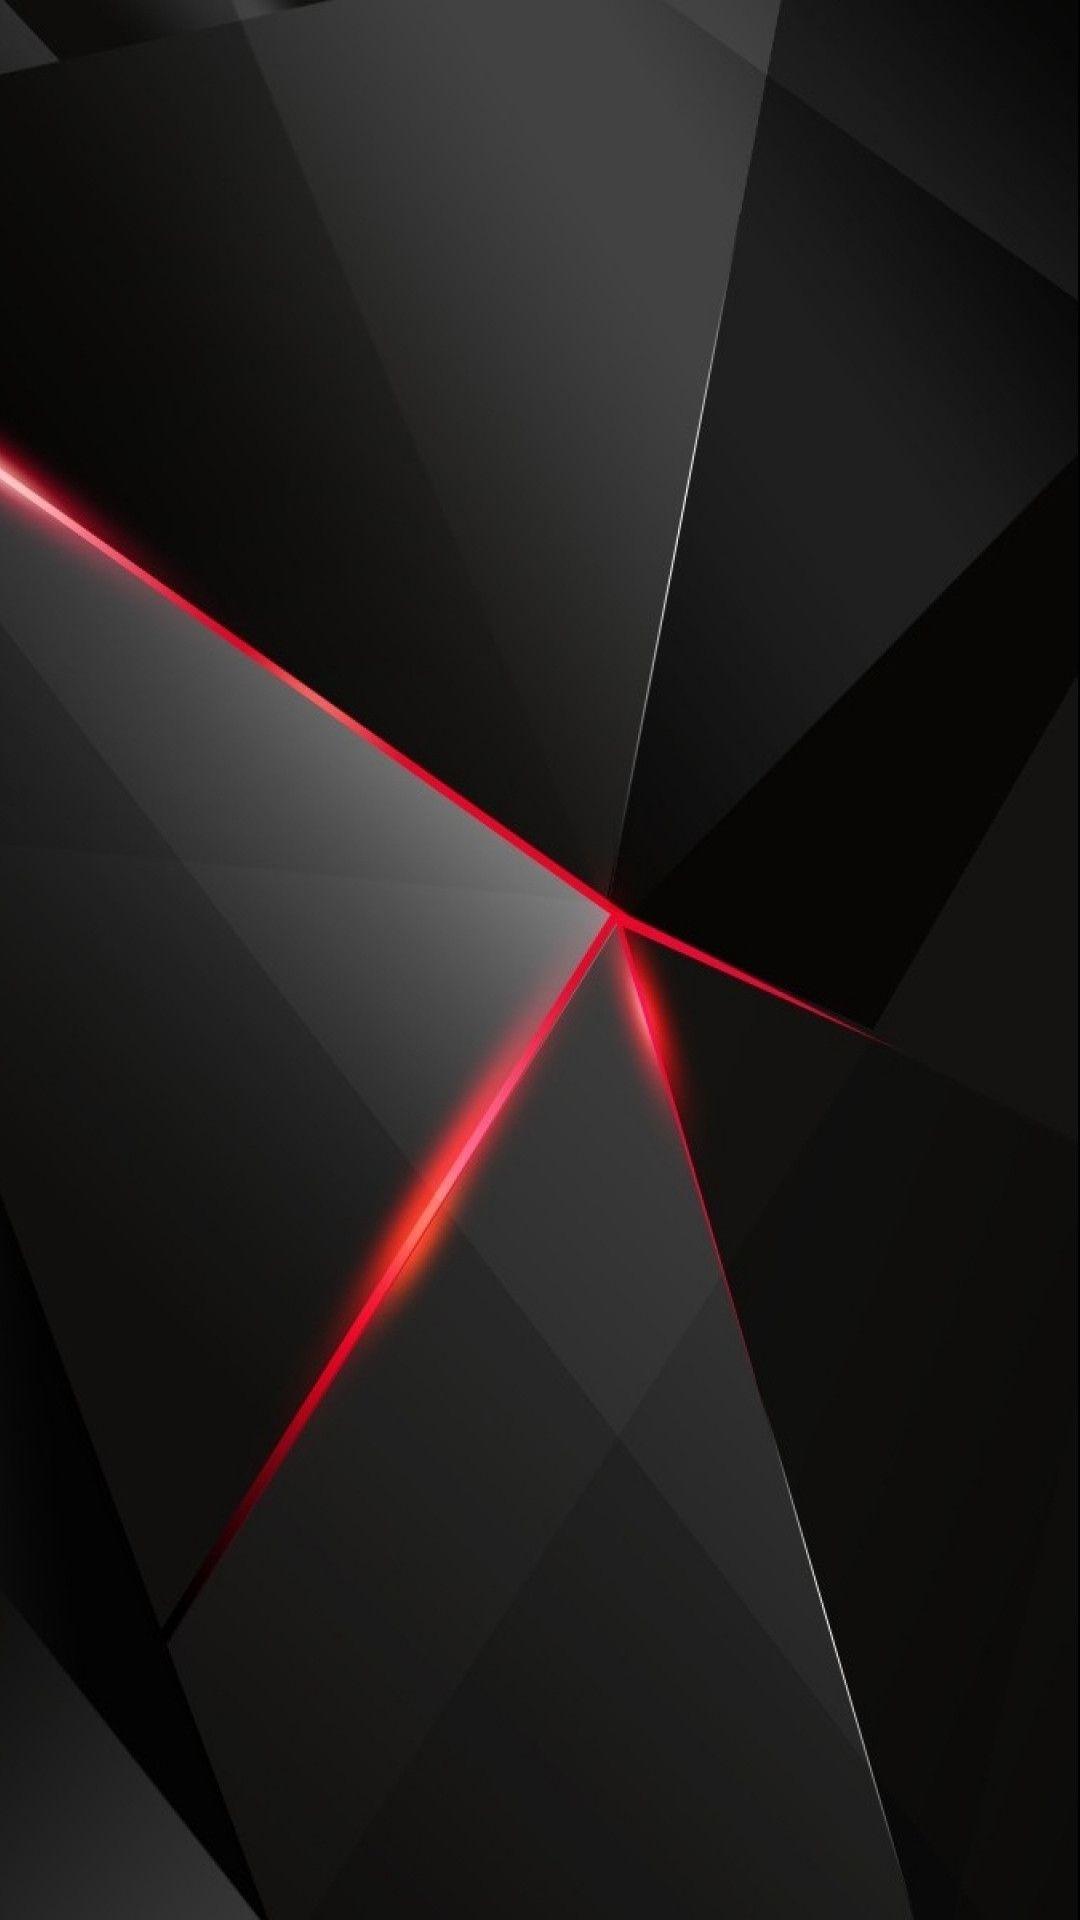 Black and Red Android Wallpapers - Top Free Black and Red Android